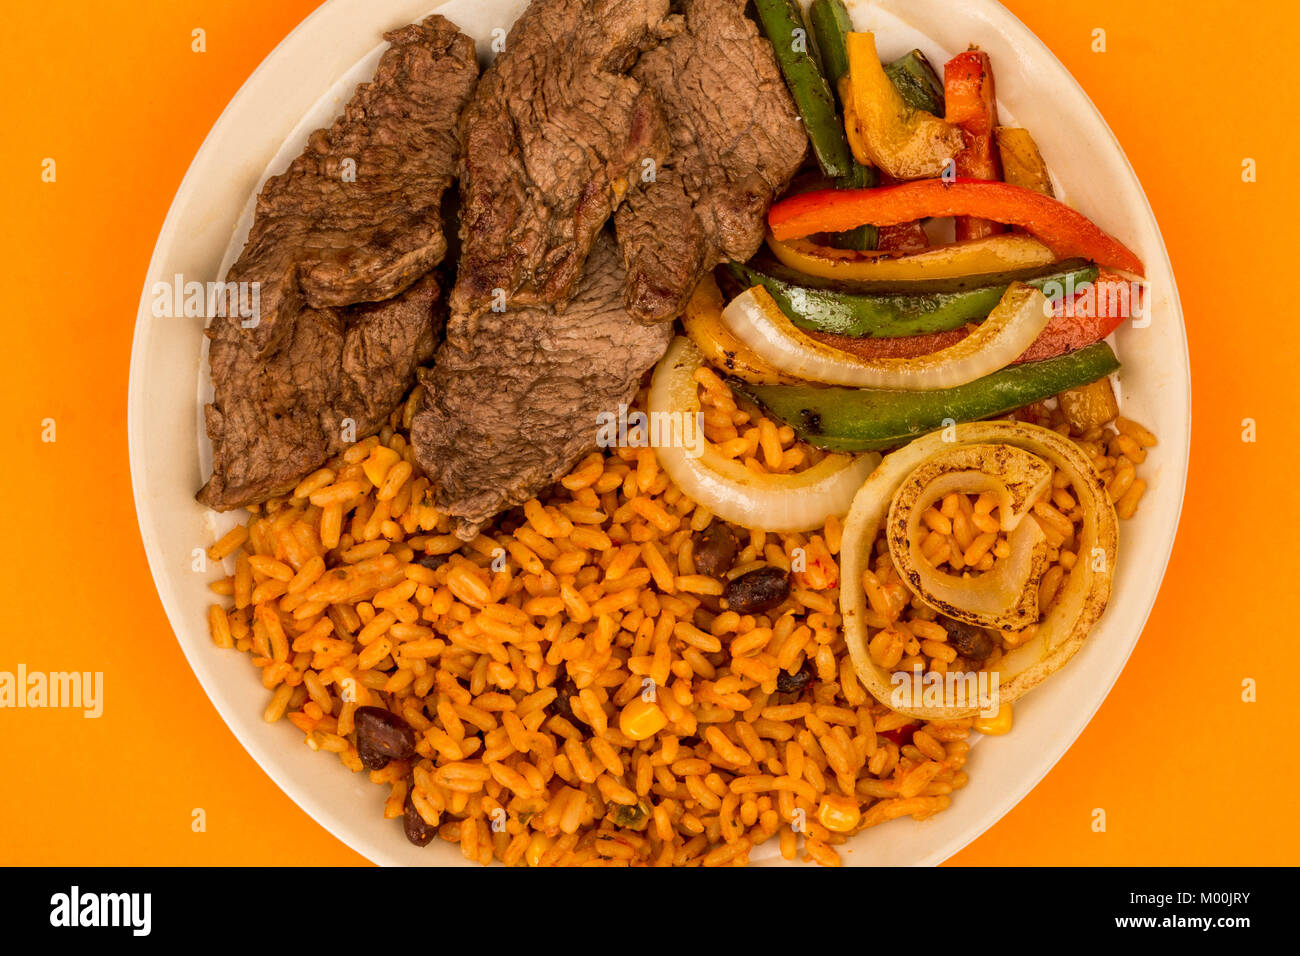 Mexican Style Steak Fajitas With Spicy Rice and Peppers Against An Orange Background Stock Photo